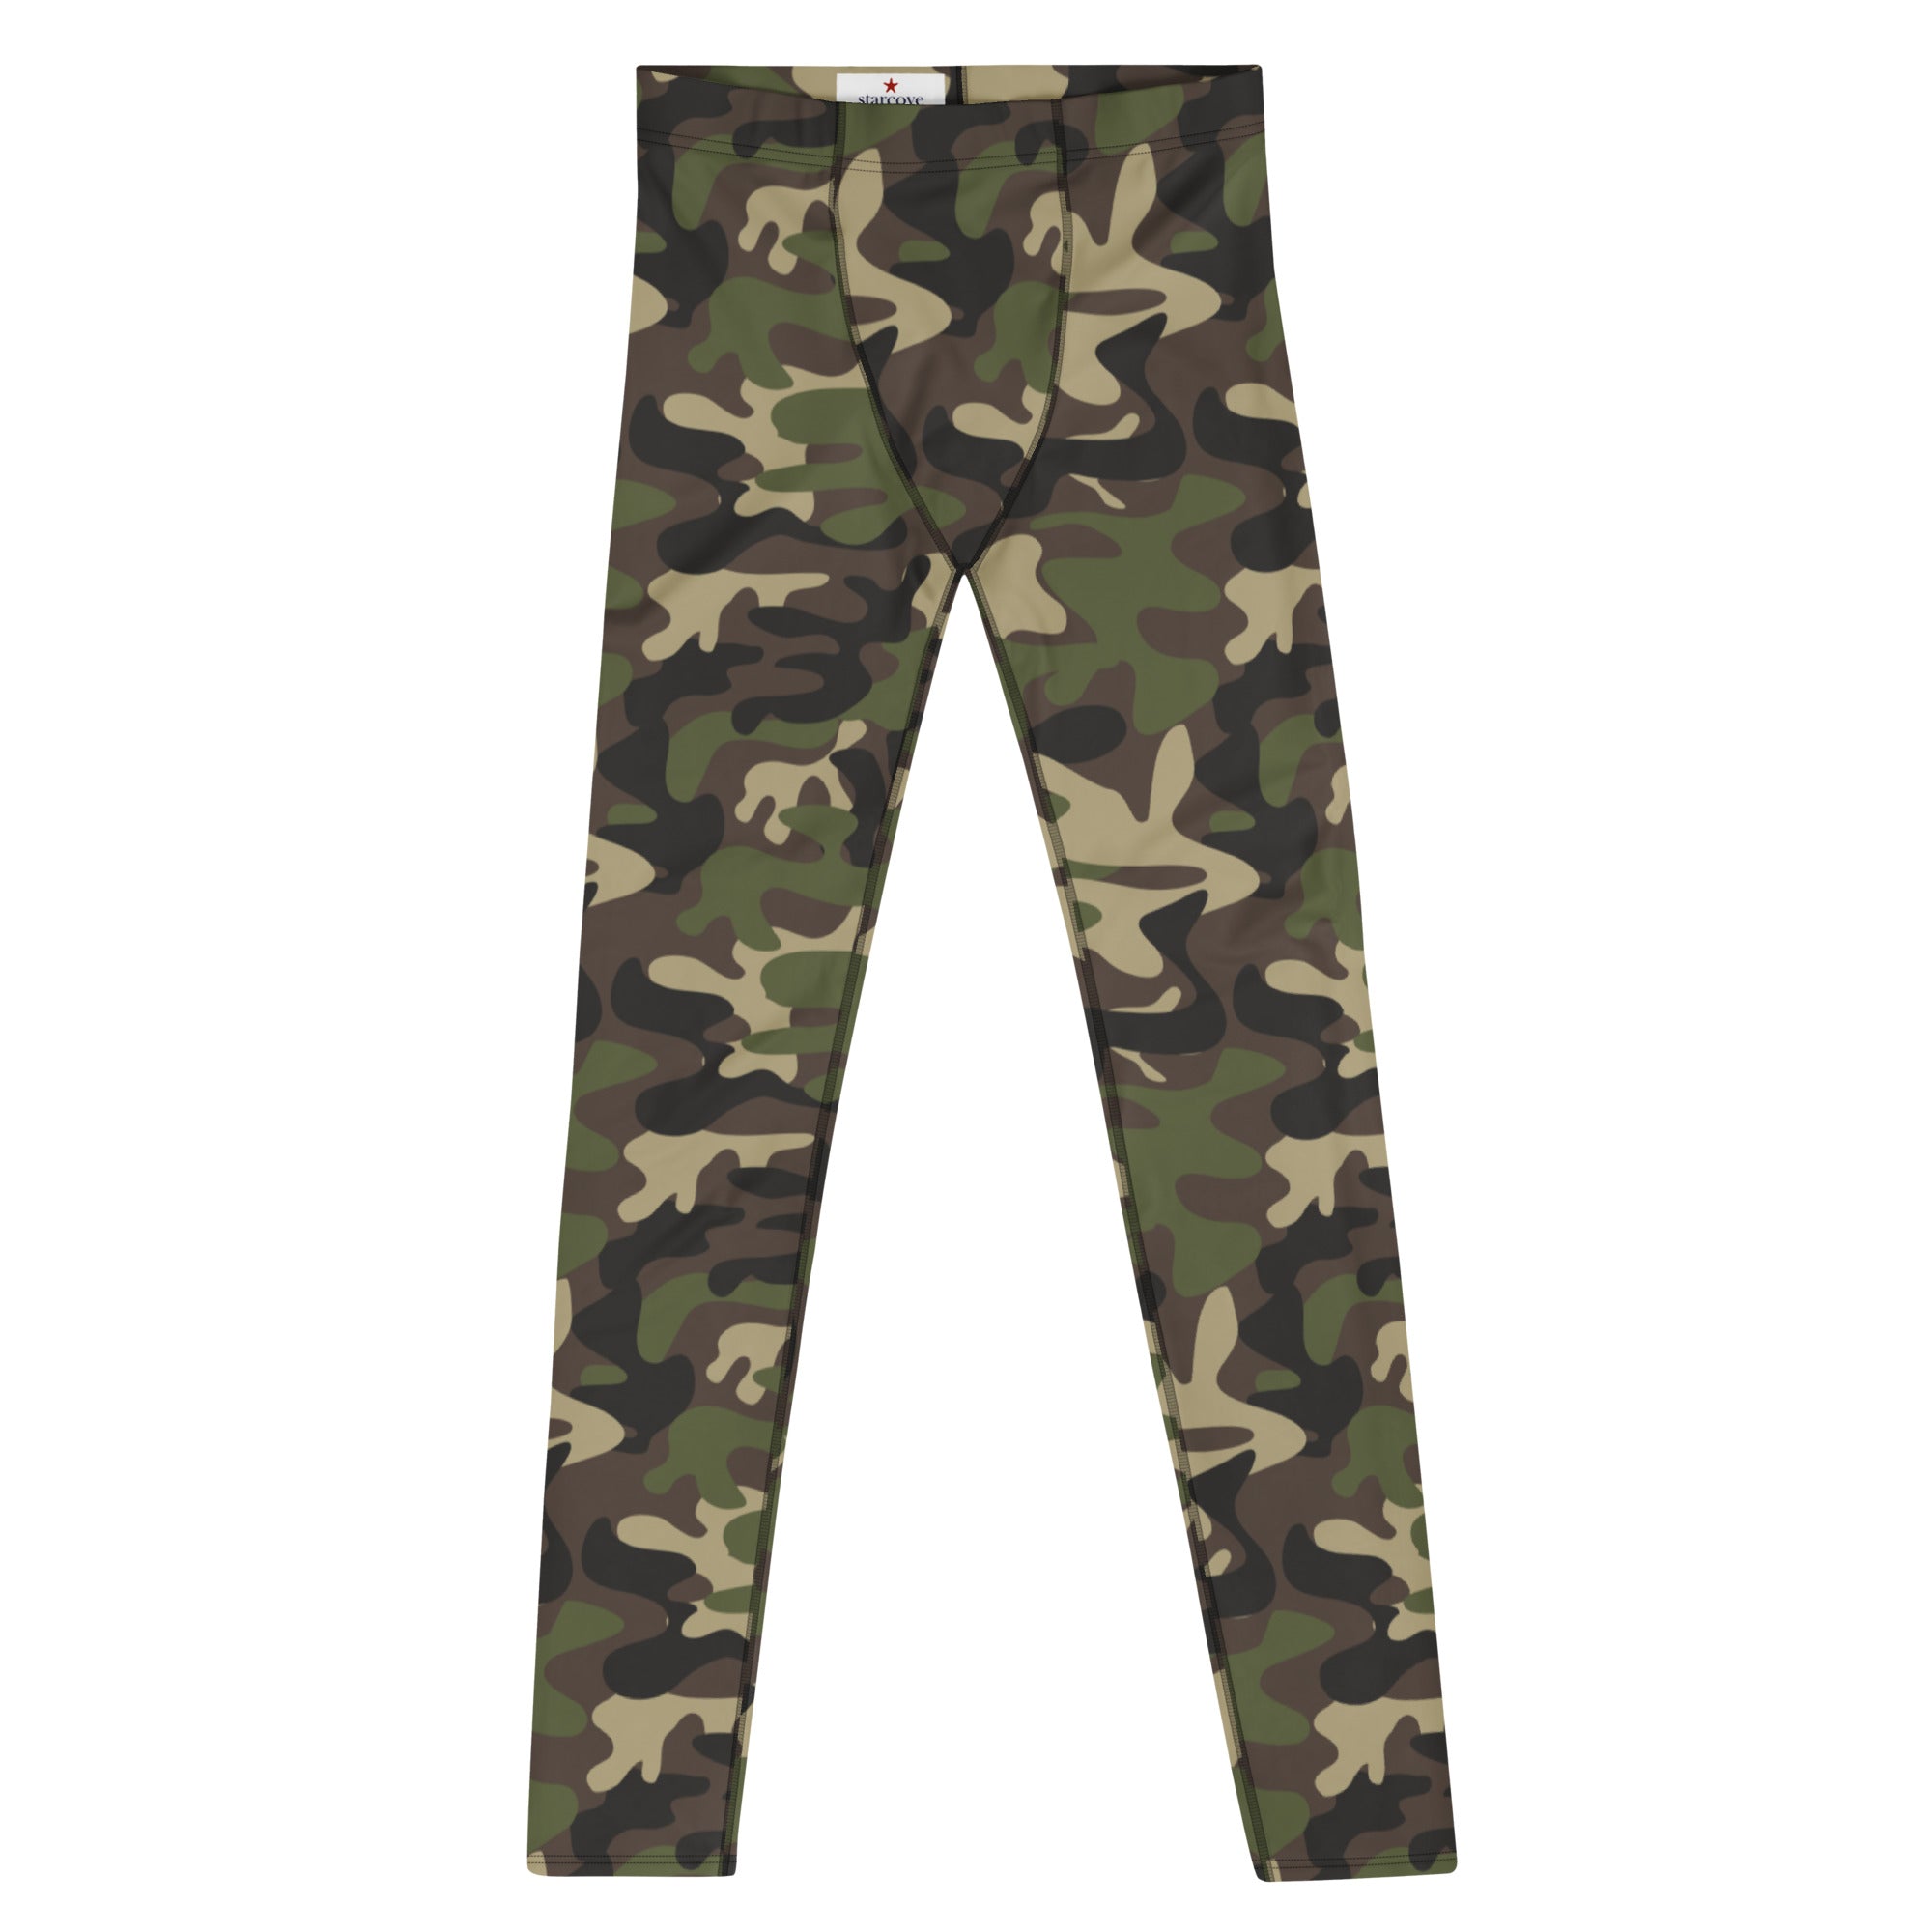 Camouflage Leggings High Waist Army Green Pants Sexy Print Workout Stretch Fitness  Legging Trousers Women Leggins Activewear From Zclgarments, $7.84 |  DHgate.Com